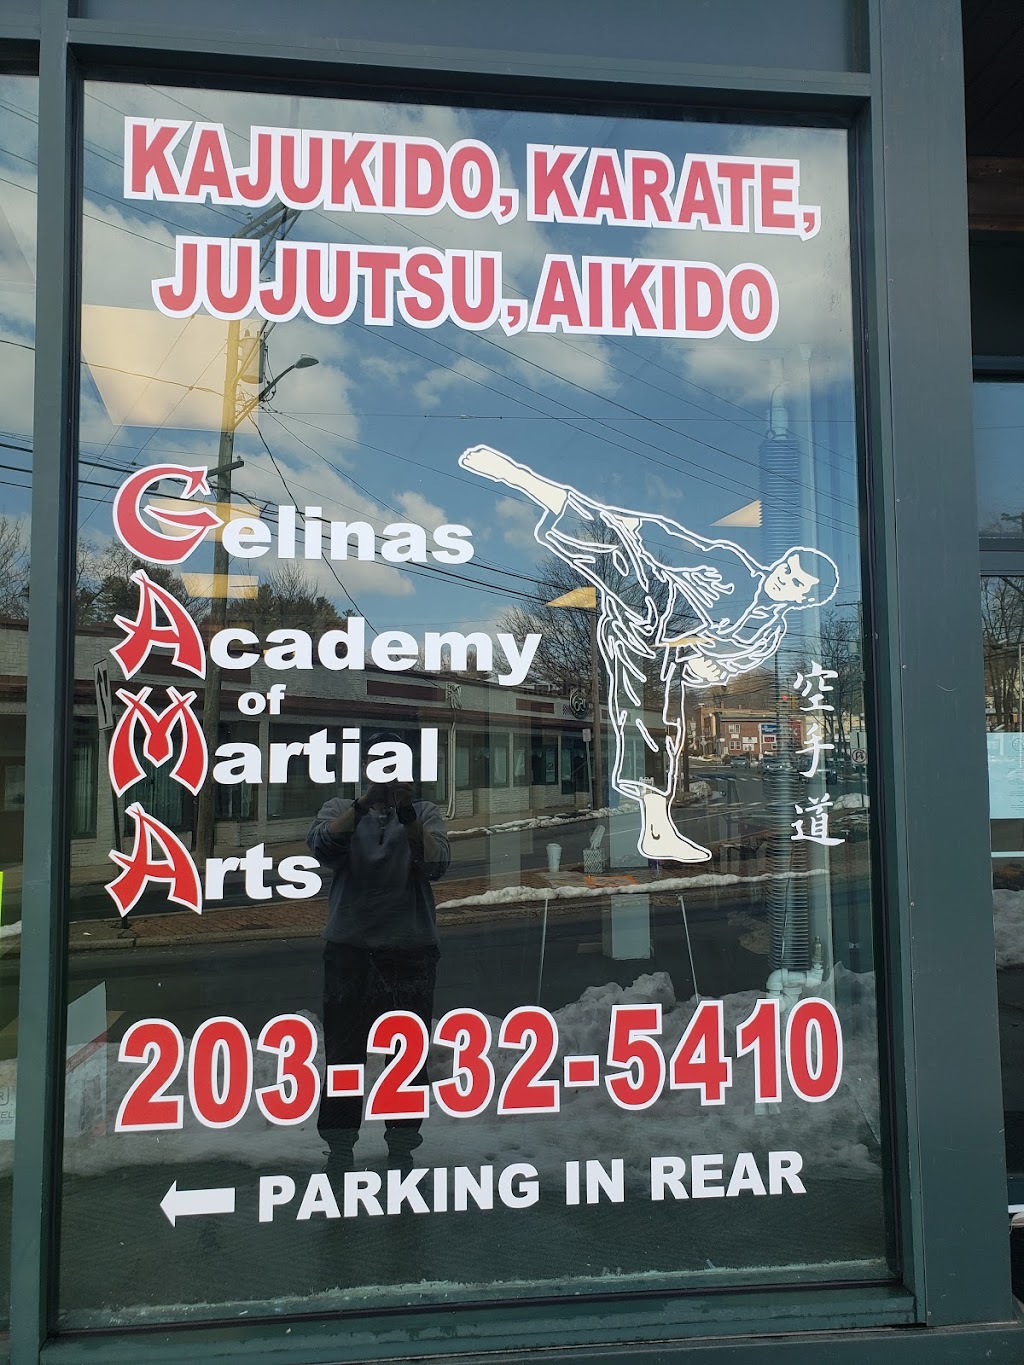 Gelinas Academy of Martial Arts | 141 Central St, Bristol, CT 06010 | Phone: (203) 232-5410